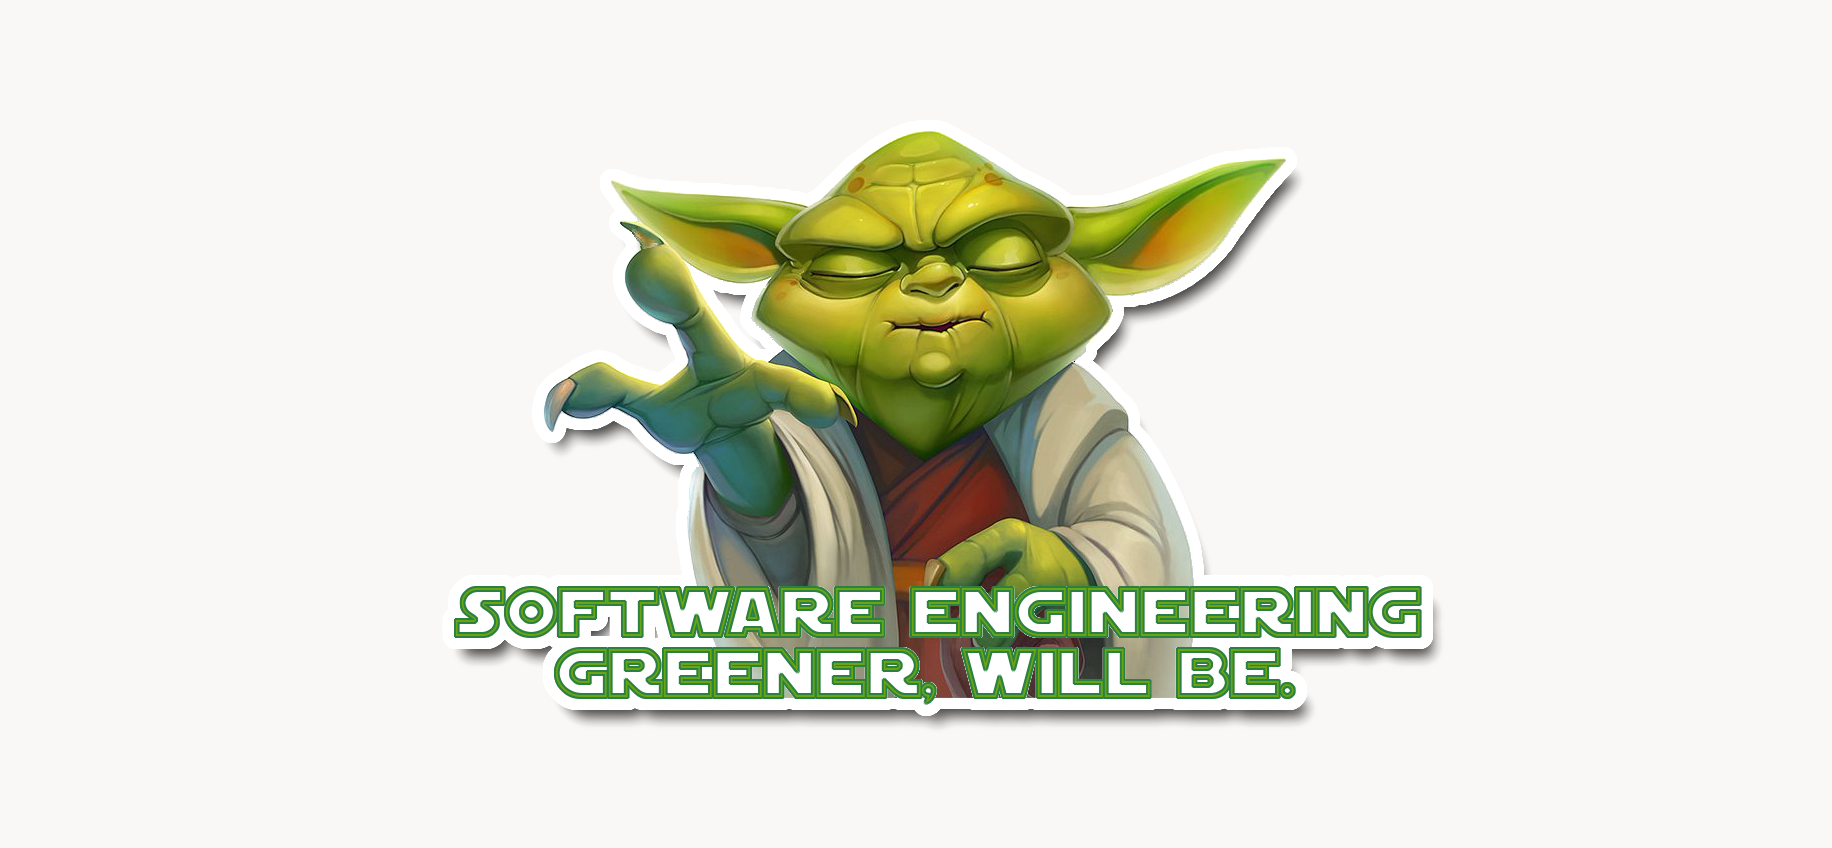 A step on the way to a GREENER SOFTWARE ENGINEERING